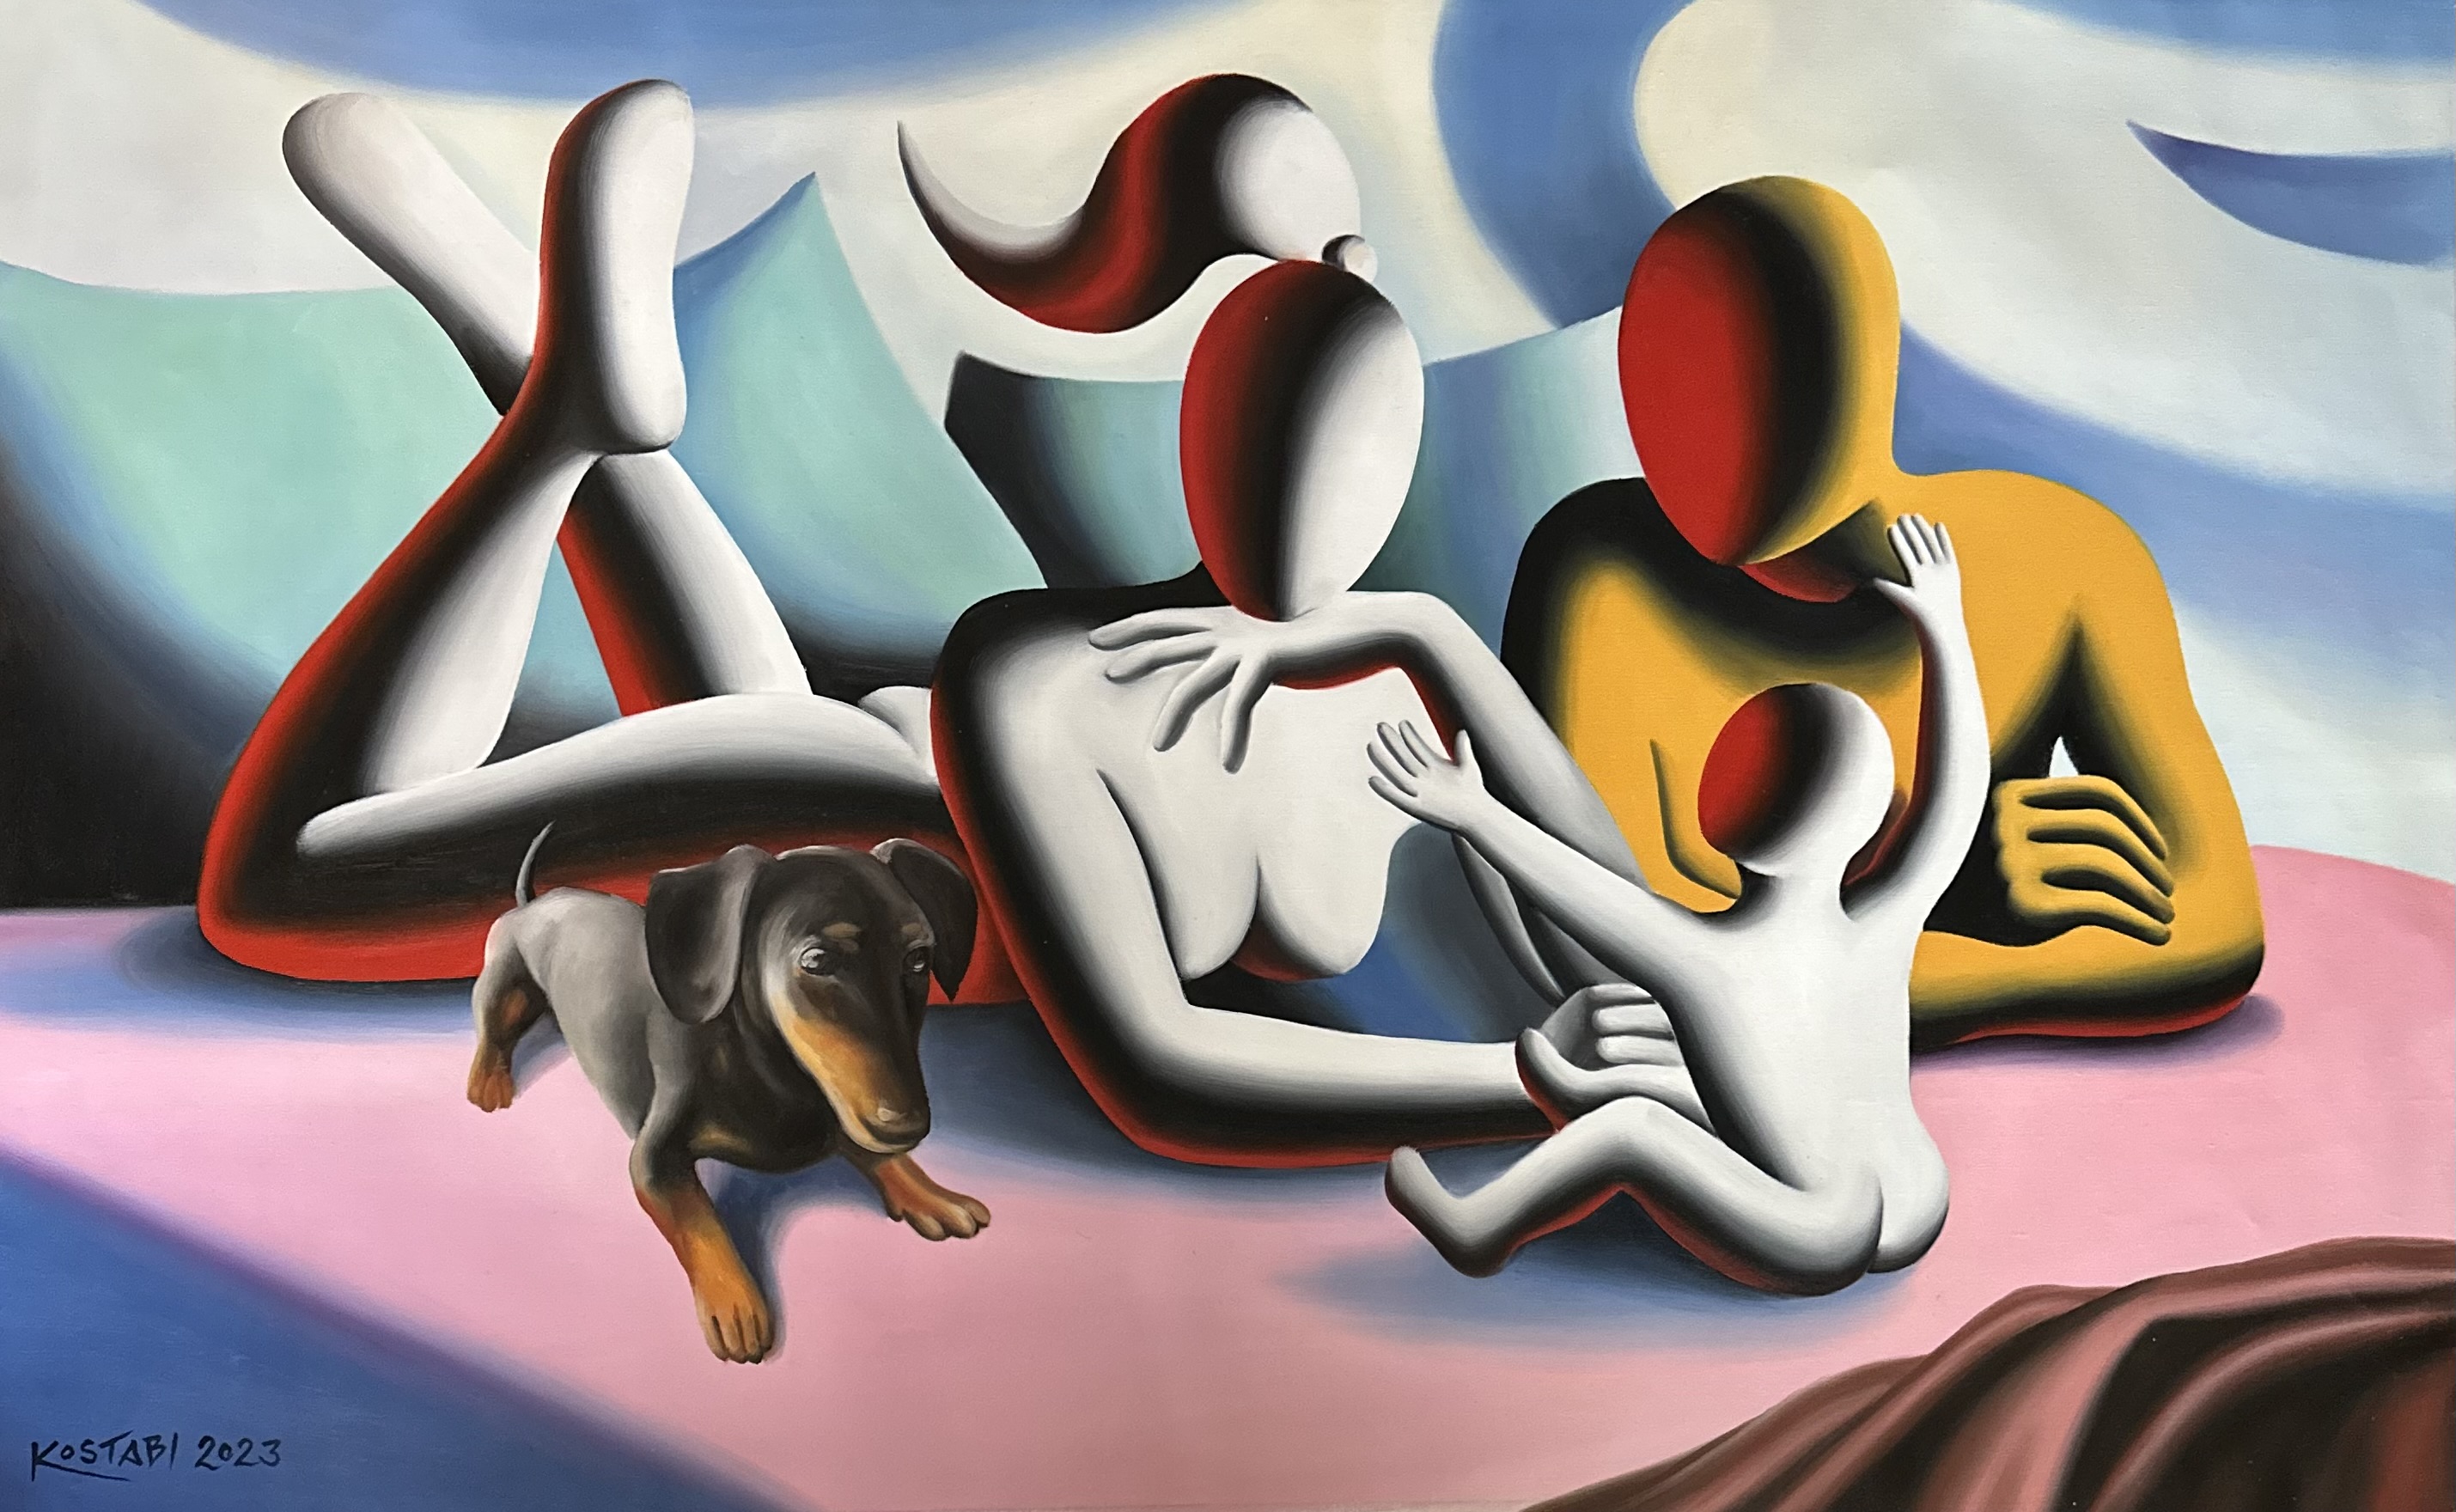 MARK KOSTABI - Wednesday Morning - Oil on Canvas - 51x32 inches